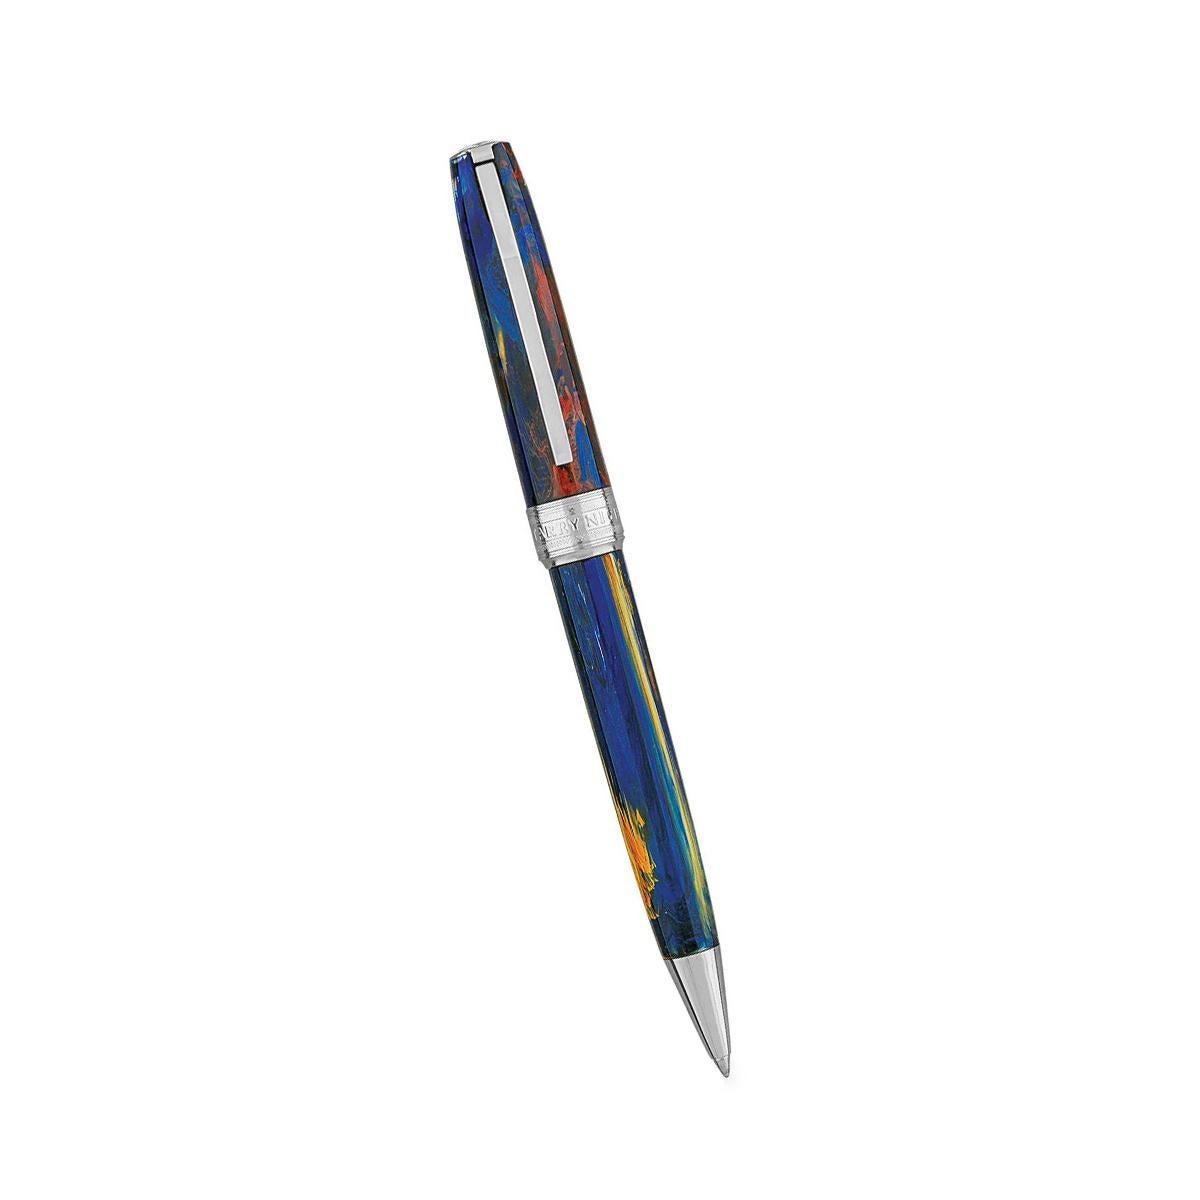 Made from natural resin uniquely mixed to represent palettes of oil paint, this Visconti Van Gogh series is inspired by the artist's color and technique. Each pen represents a specific Van Gogh painting. The pen utilizes Visconti's eighteen-faceted